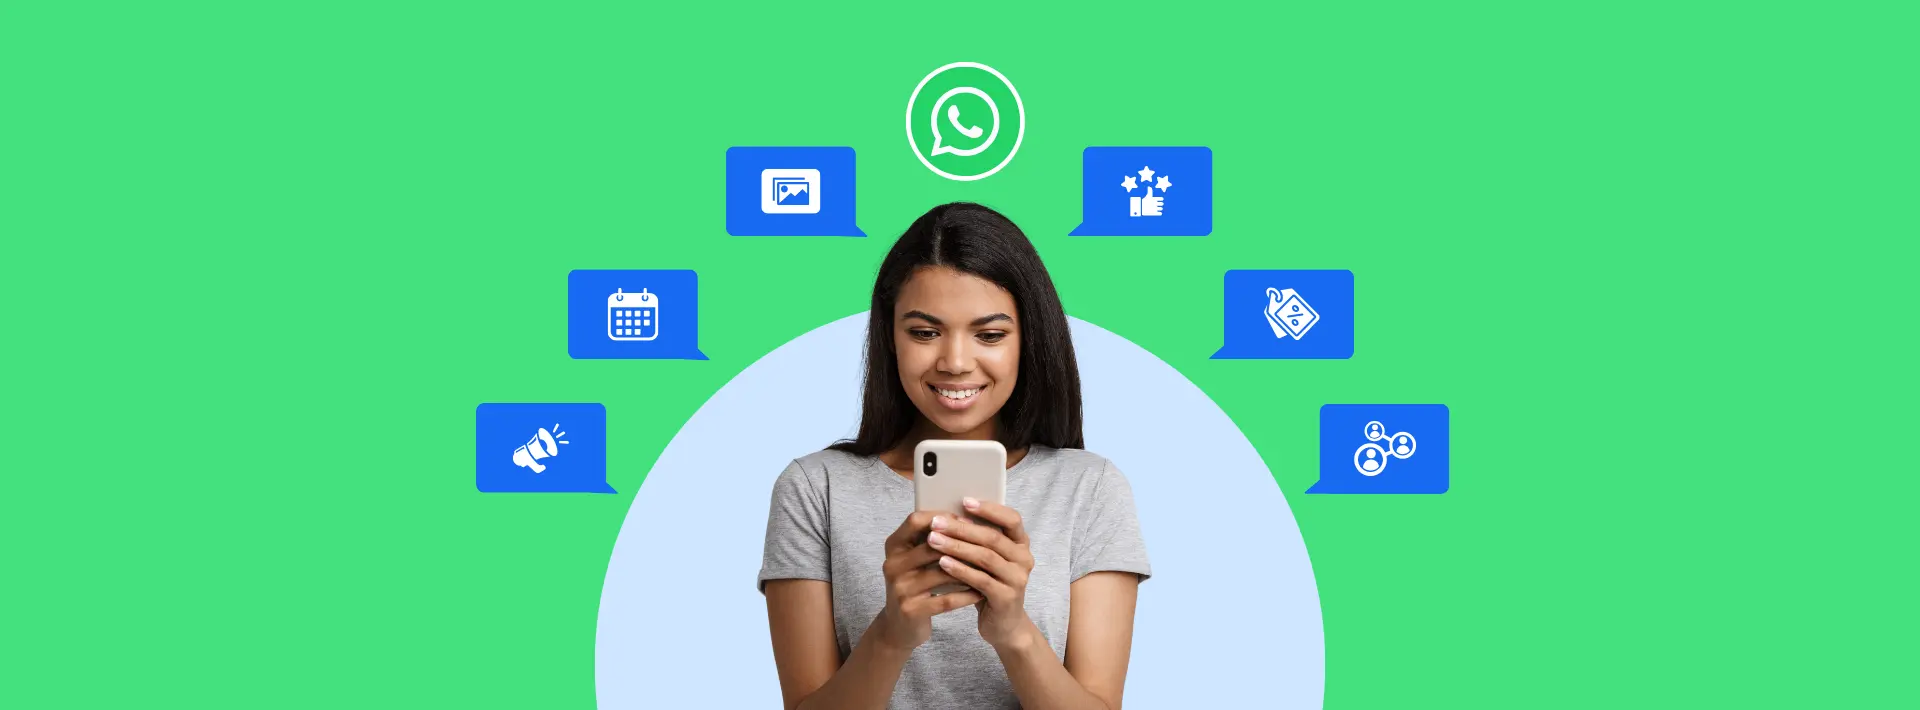 Banner showing woman using WhatsApp with numerous use cases